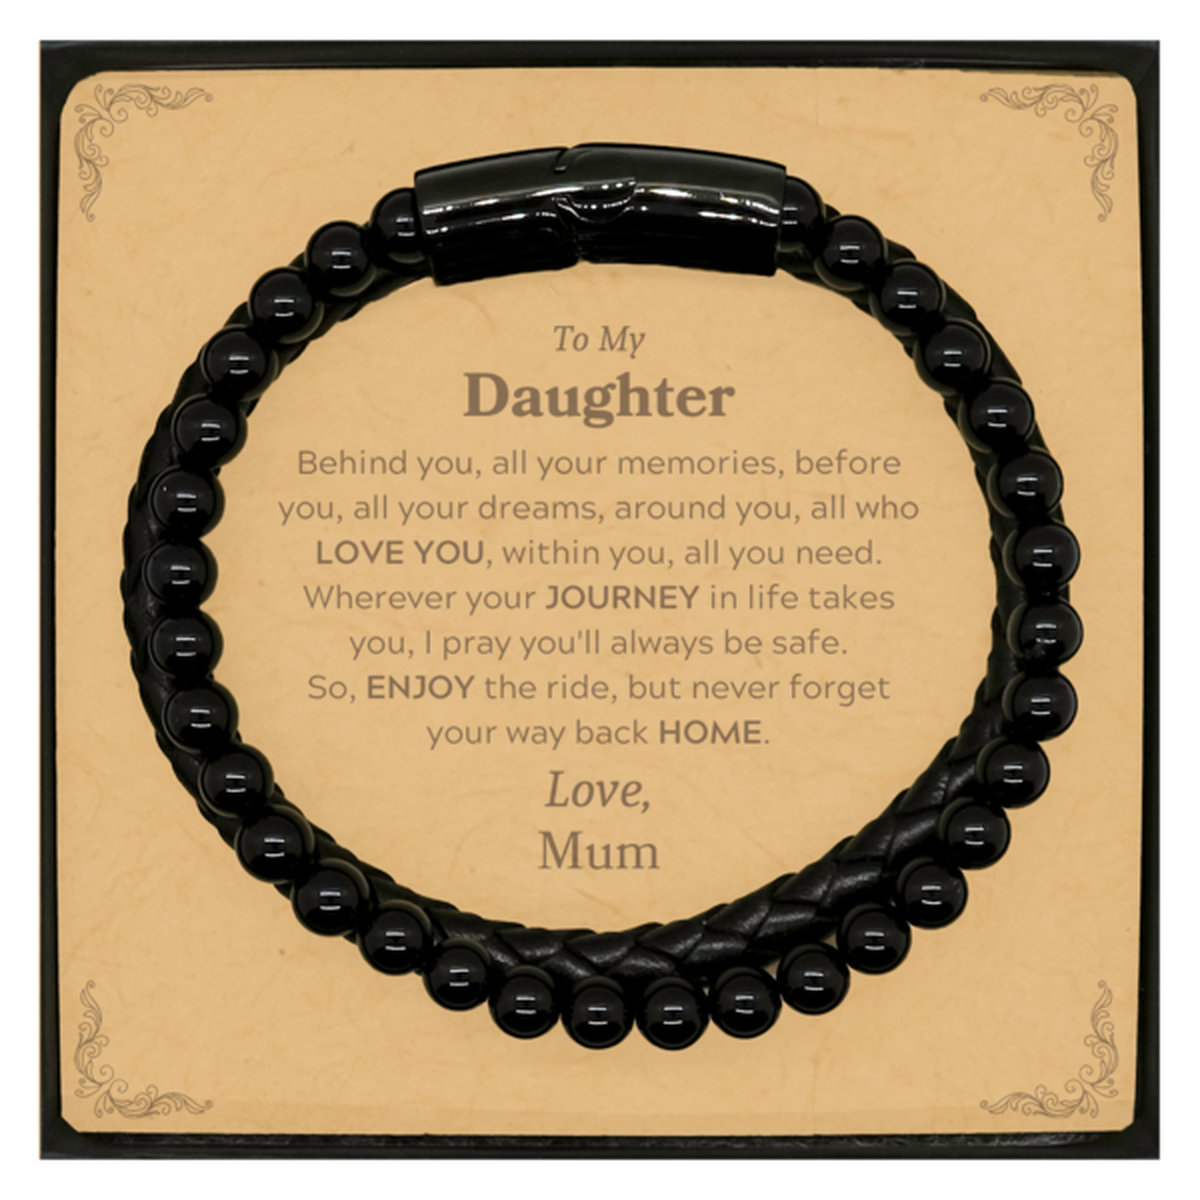 To My Daughter Graduation Gifts from Mum, Daughter Stone Leather Bracelets Christmas Birthday Gifts for Daughter Behind you, all your memories, before you, all your dreams. Love, Mum